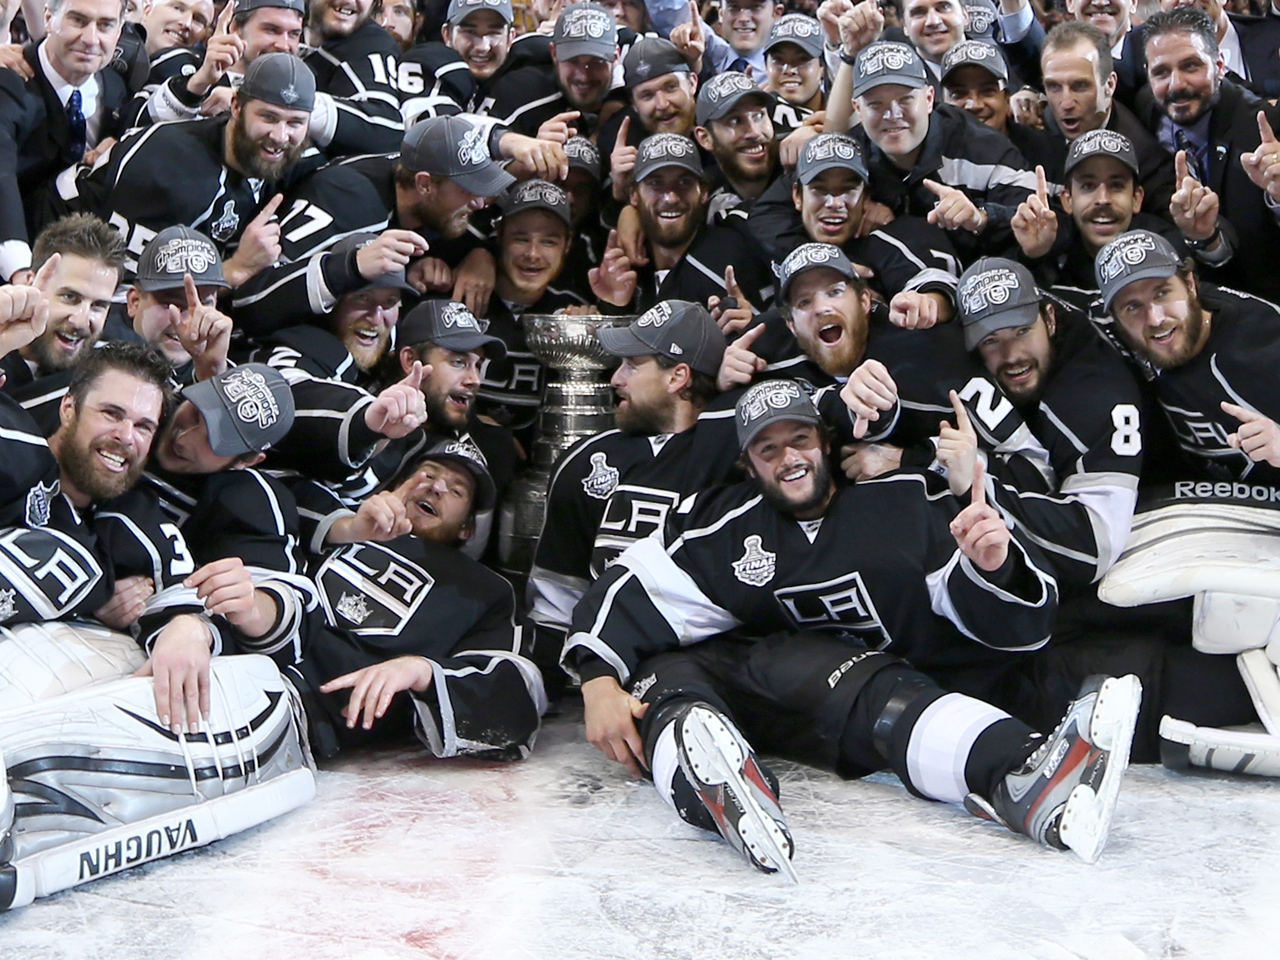 Kings beat Devils to claim first Stanley Cup